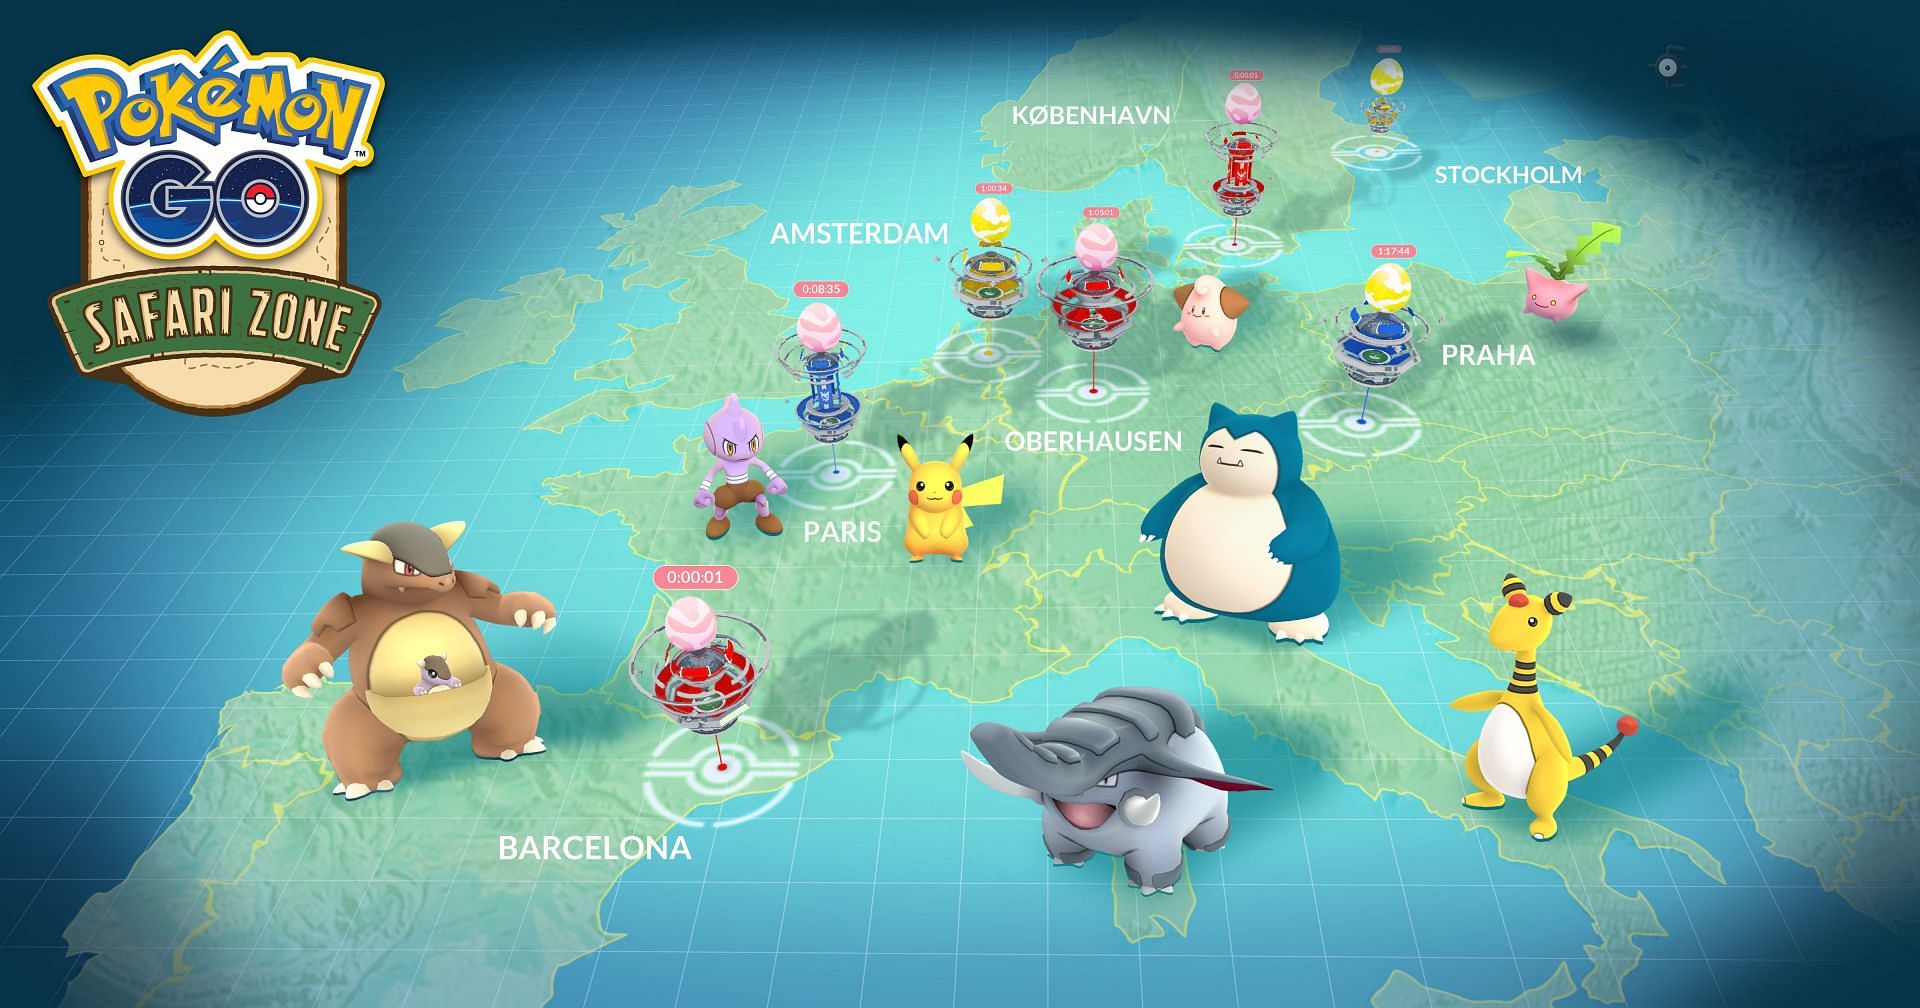 Pokemon GO is popular worldwide, but not all nations support it (Image via Niantic)